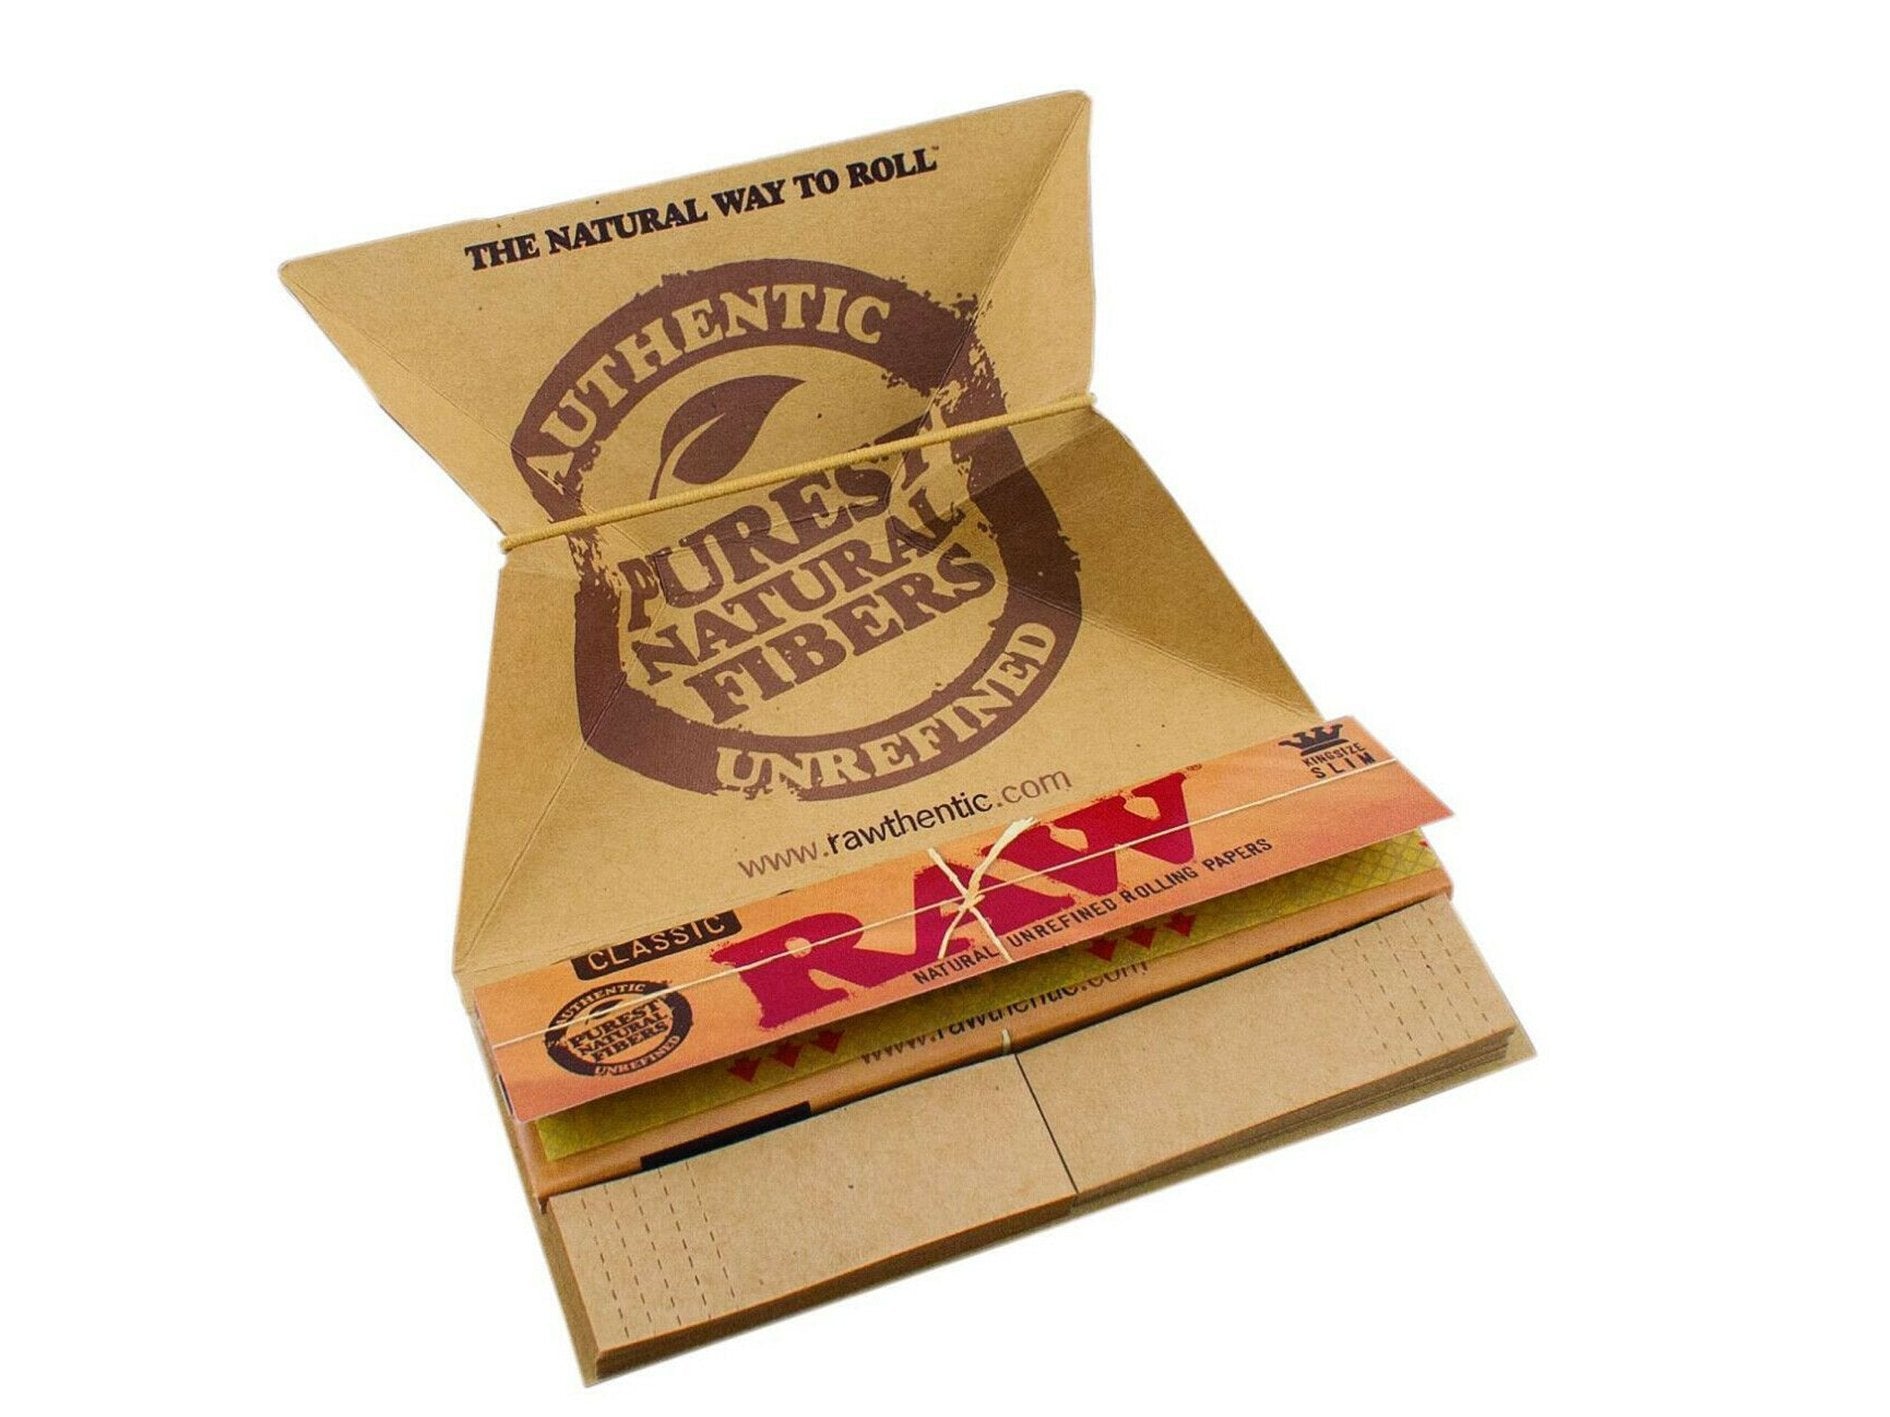 RAW Classic Artesano King Size Slim Rolling Papers Tips & Tray - VIR Wholesale